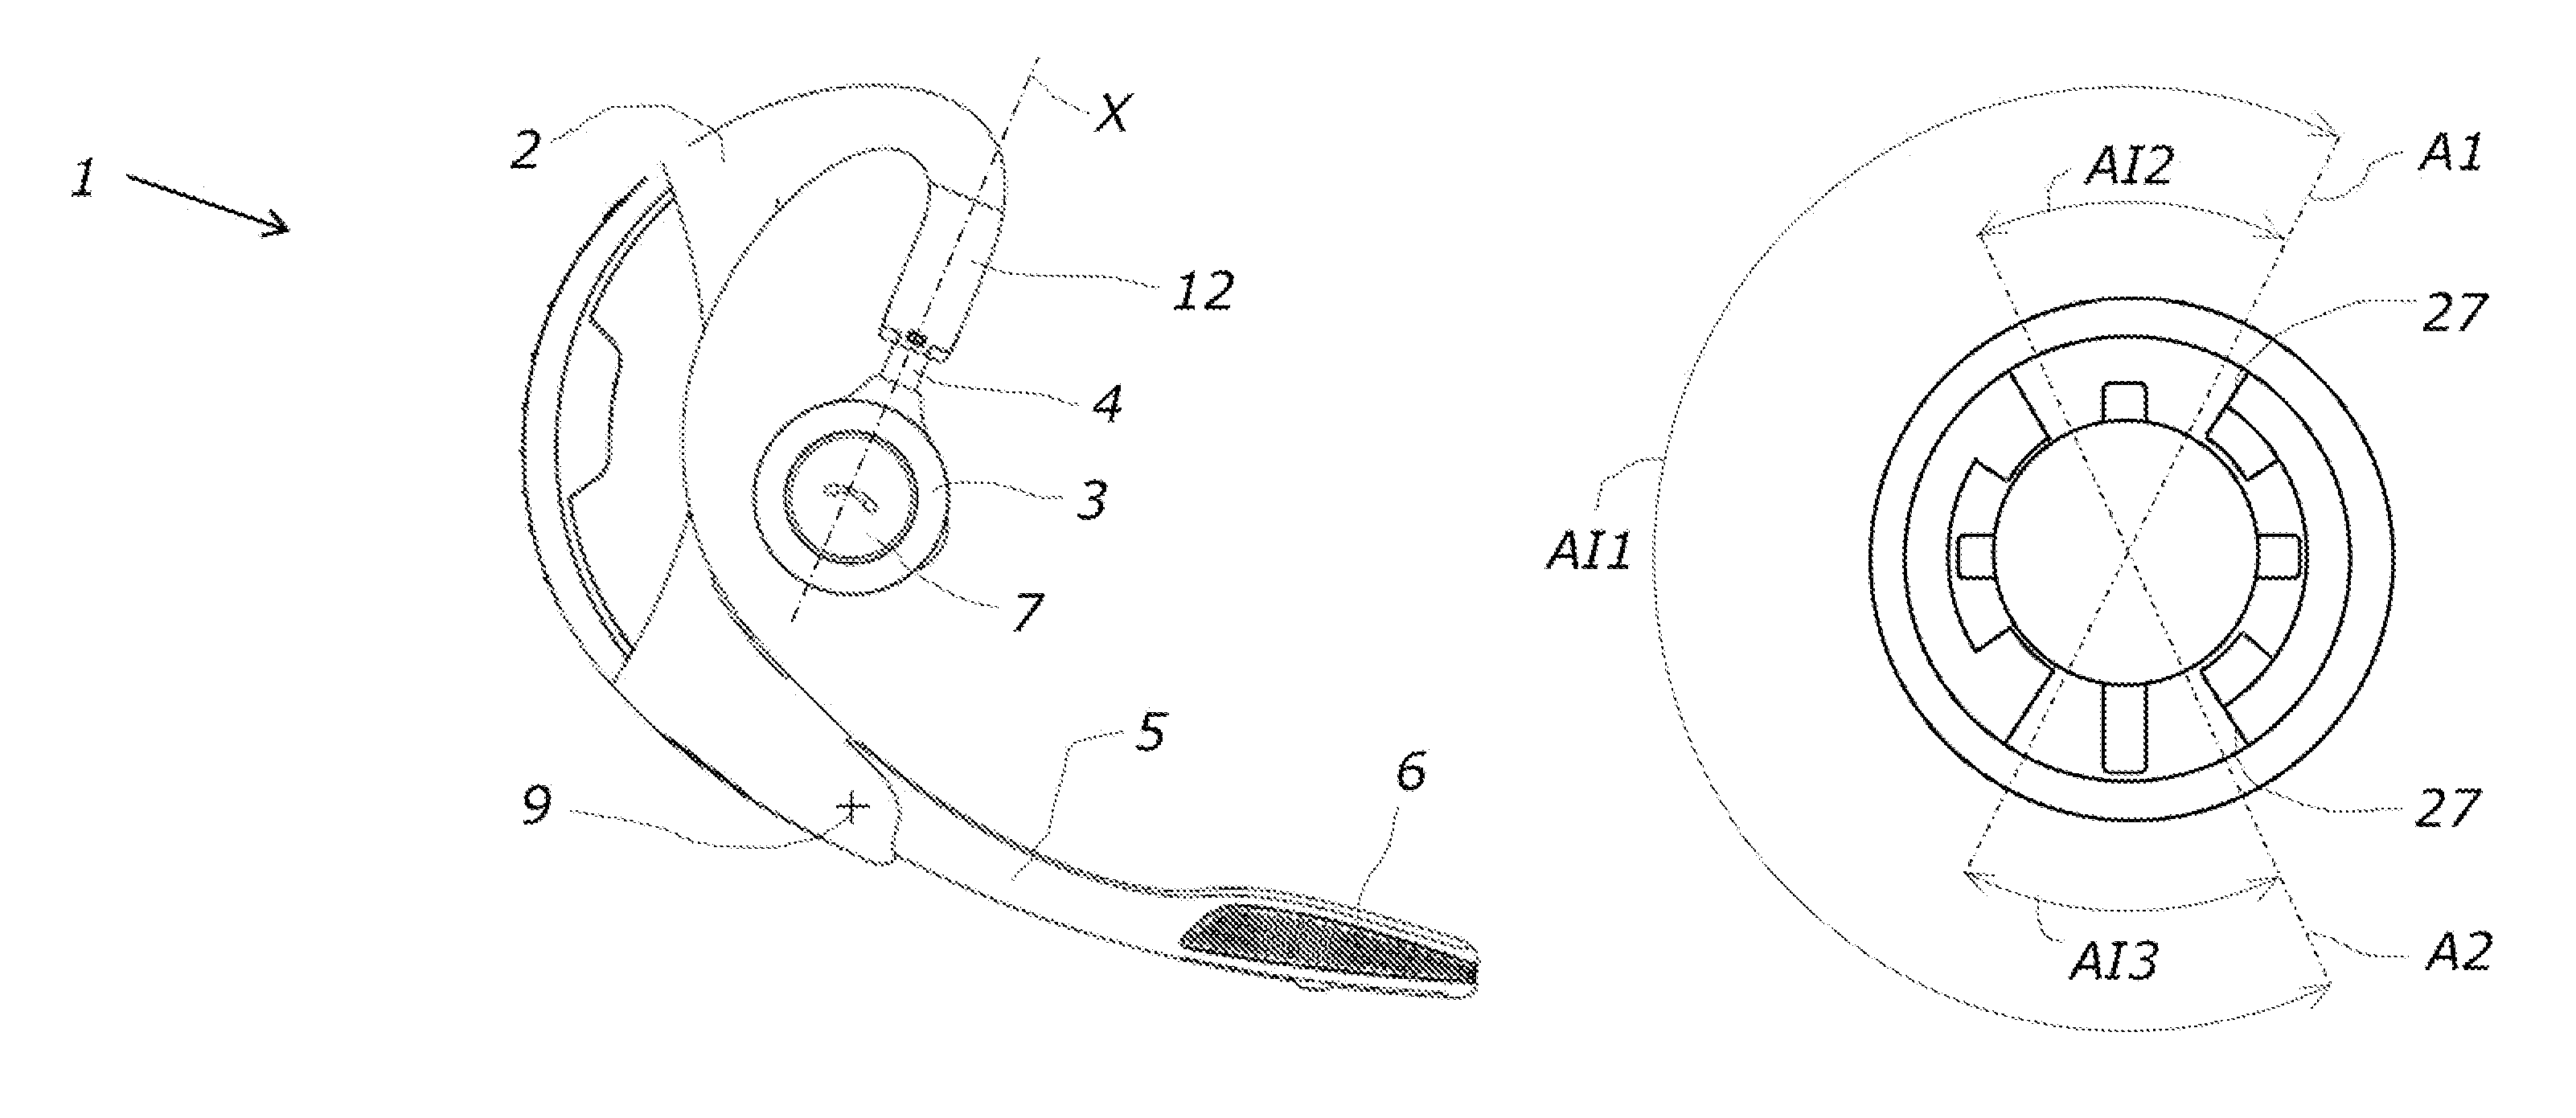 Headset with a rotatable speaker housing